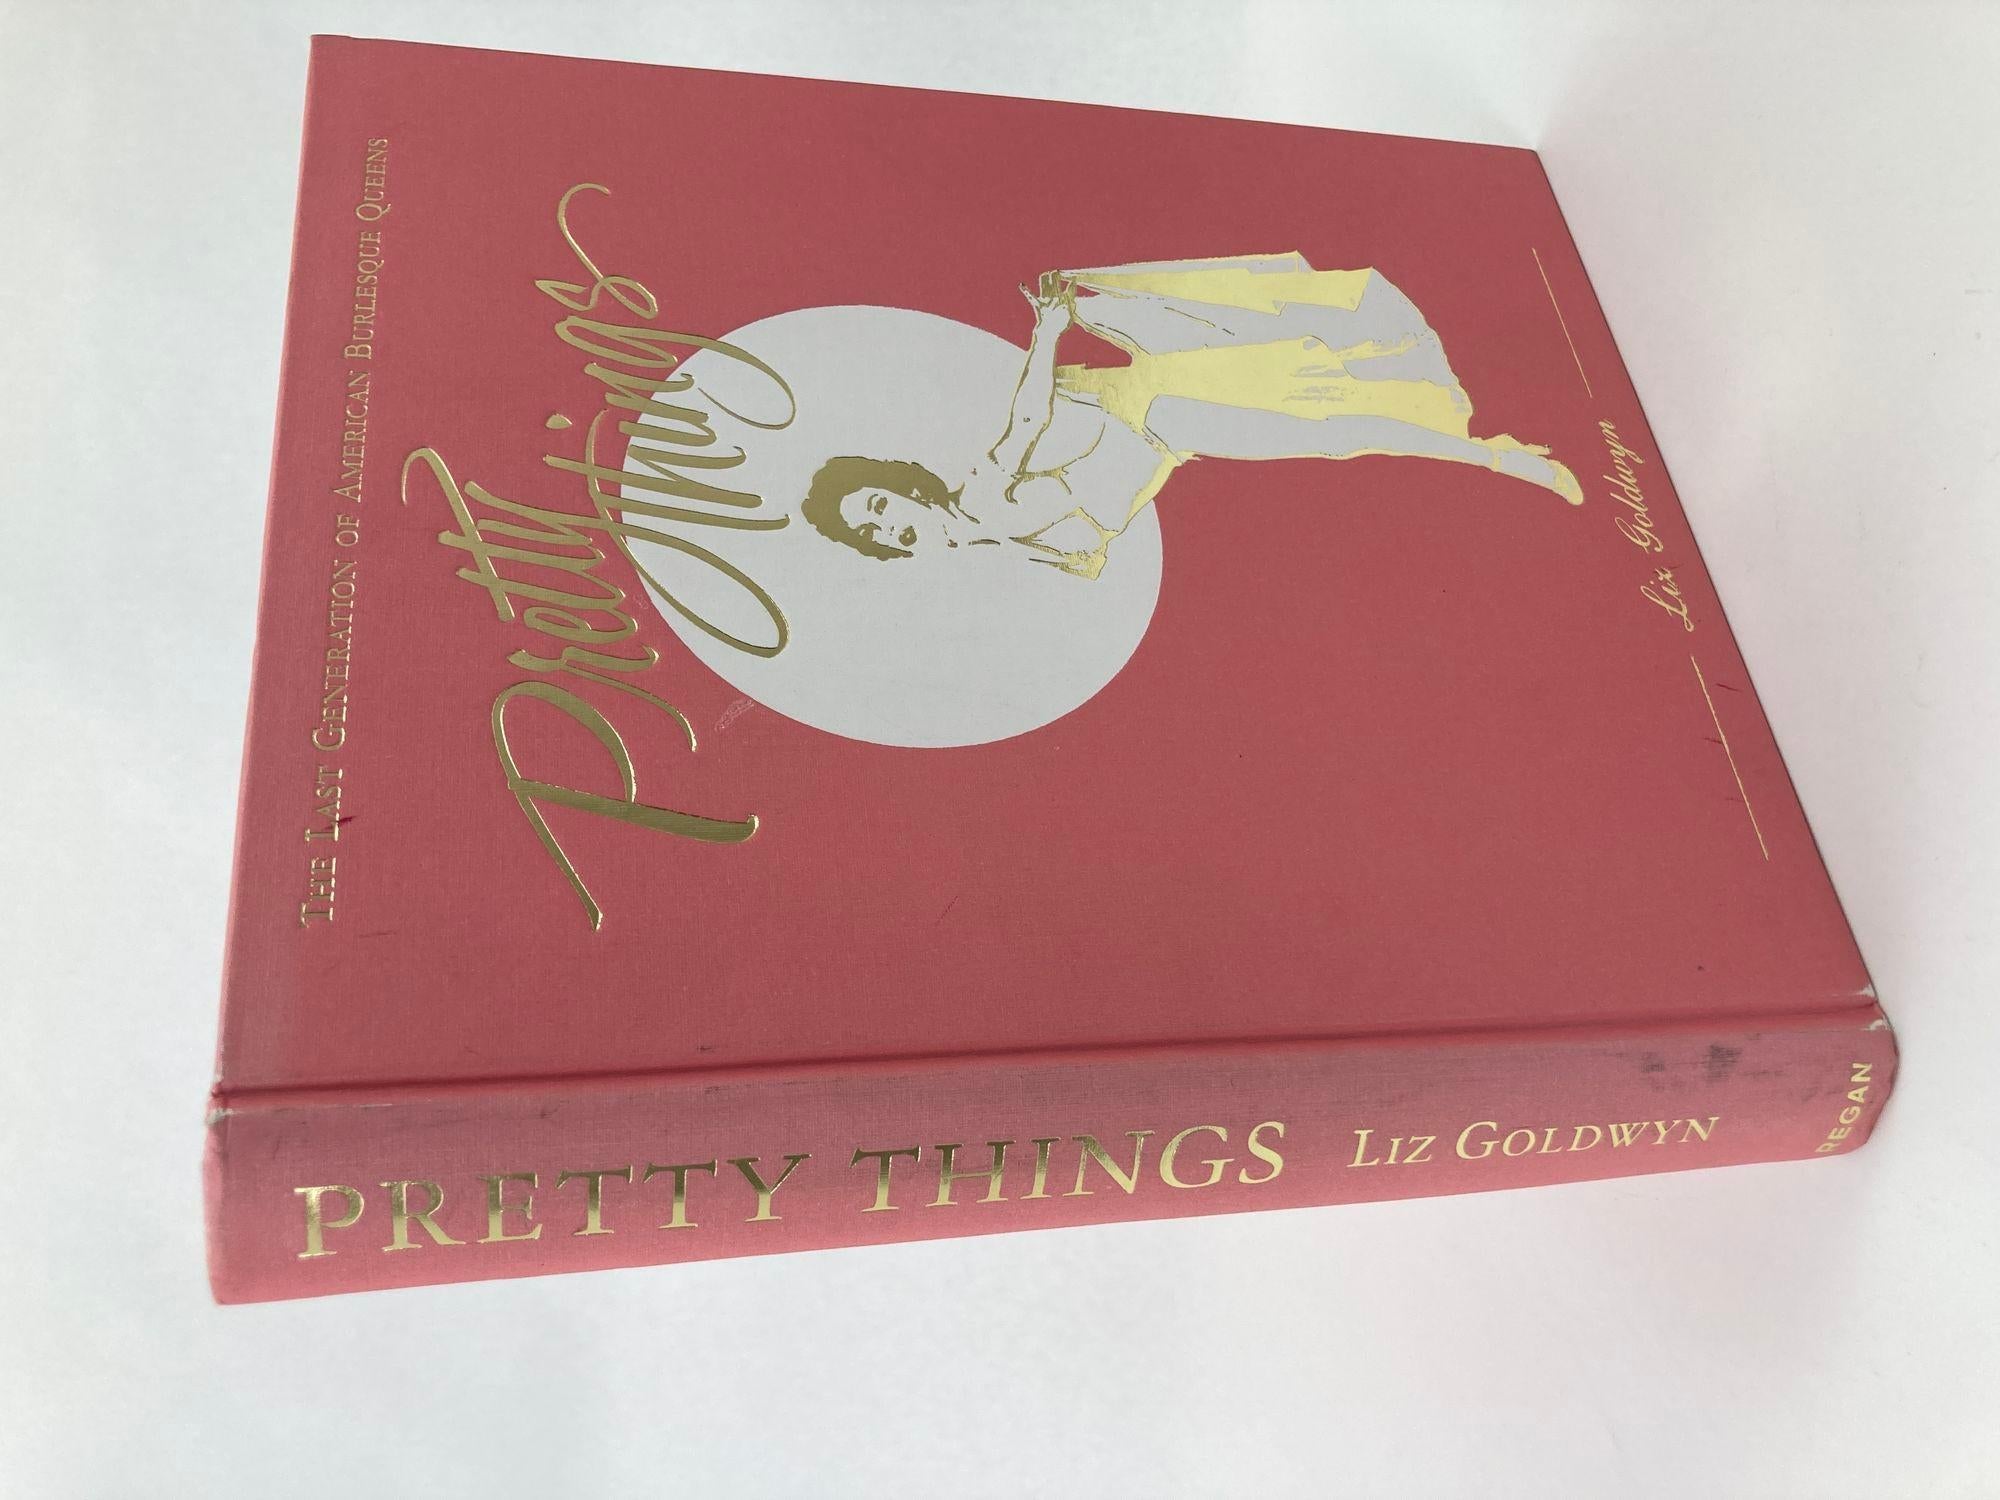 Pretty Things The Last Generation of American Burlesque Queens by Liz Goldwyn In Good Condition For Sale In North Hollywood, CA